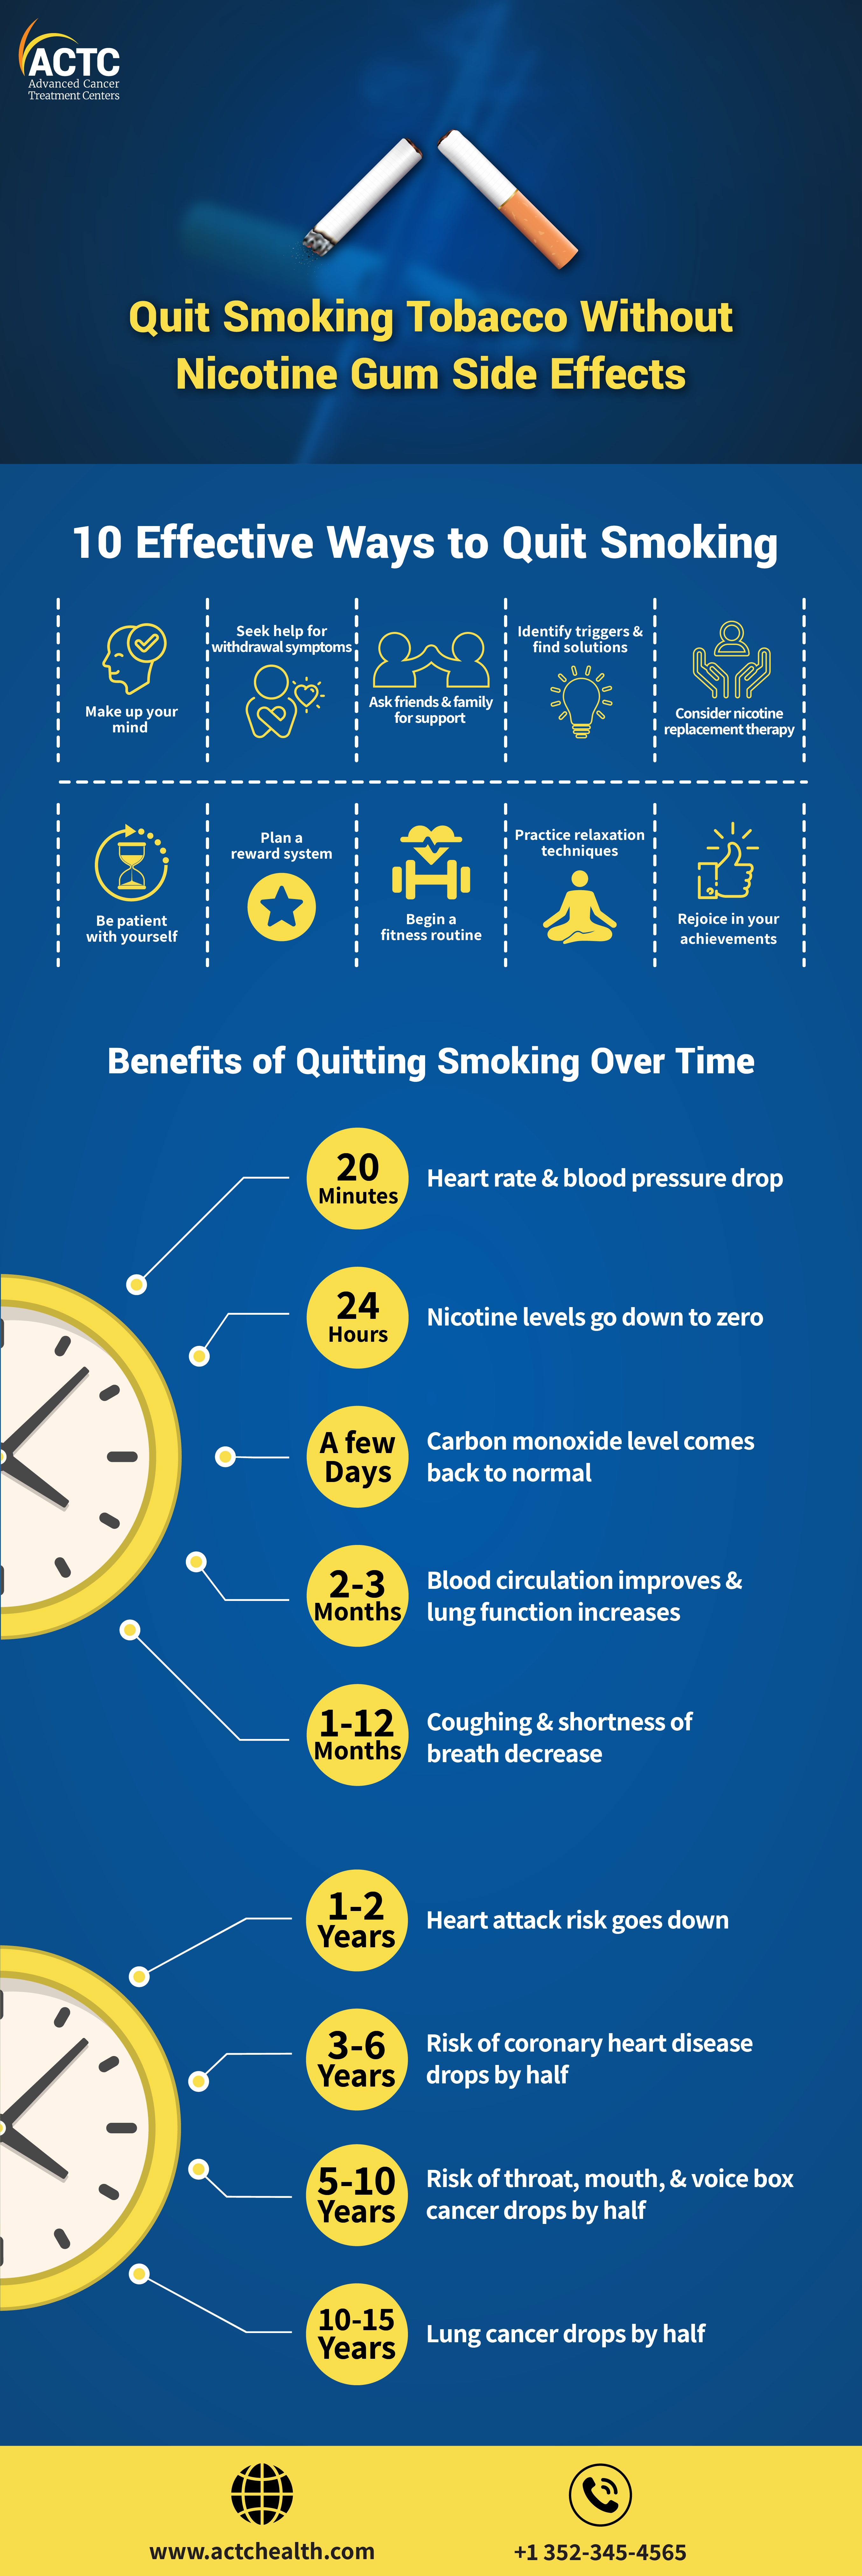 Quit Smoking Tobacco Without Nicotine Gum Side Effects infographic